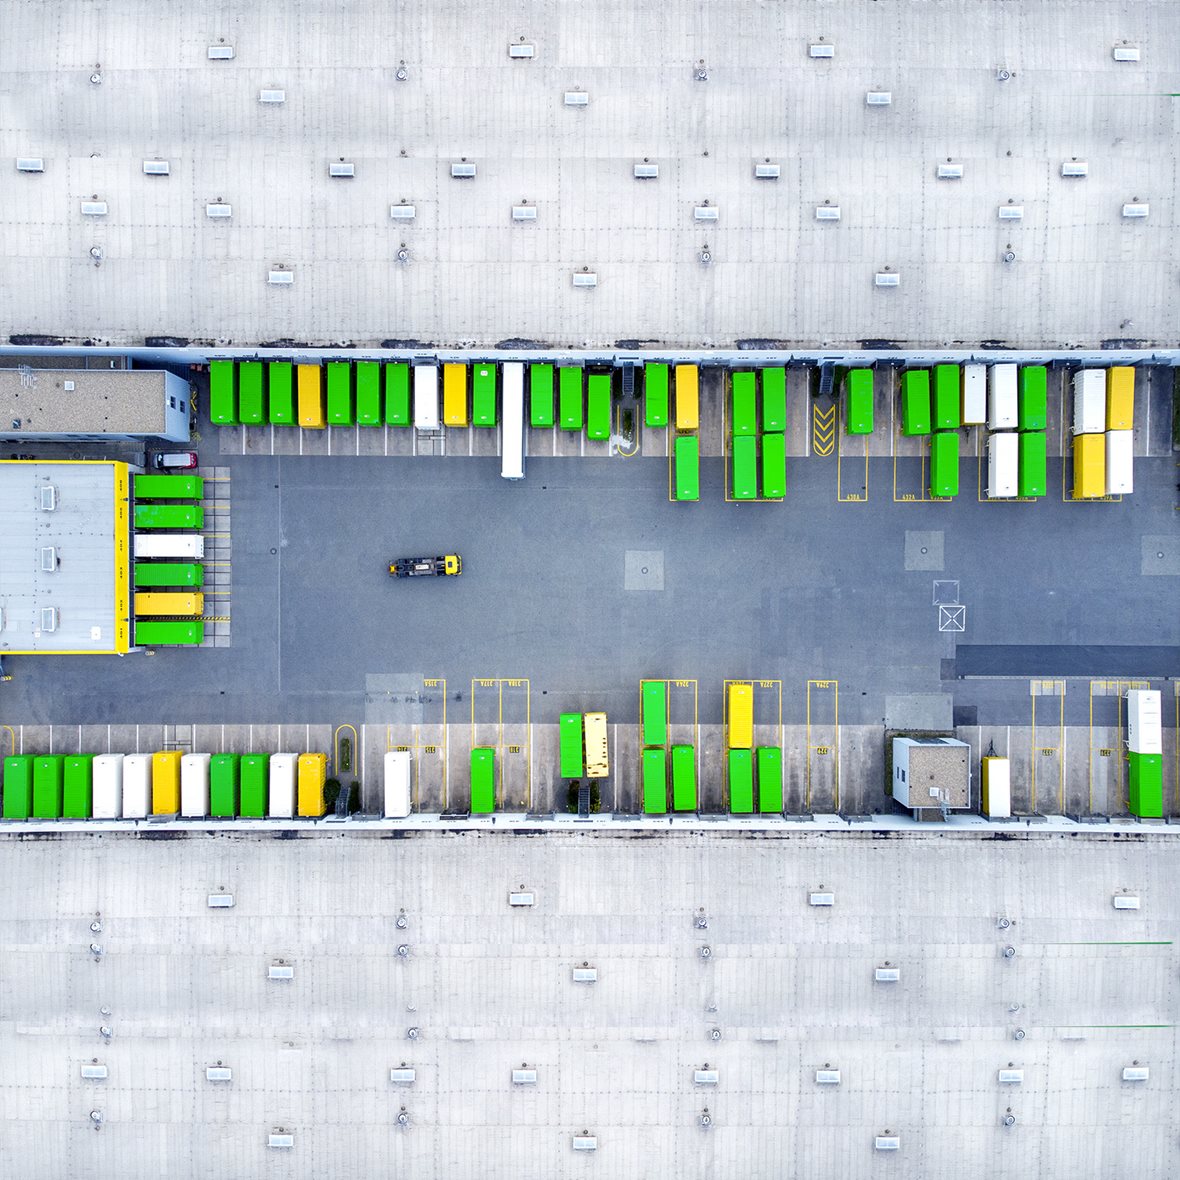 Aerial view of a distribution logistics building parking lot.